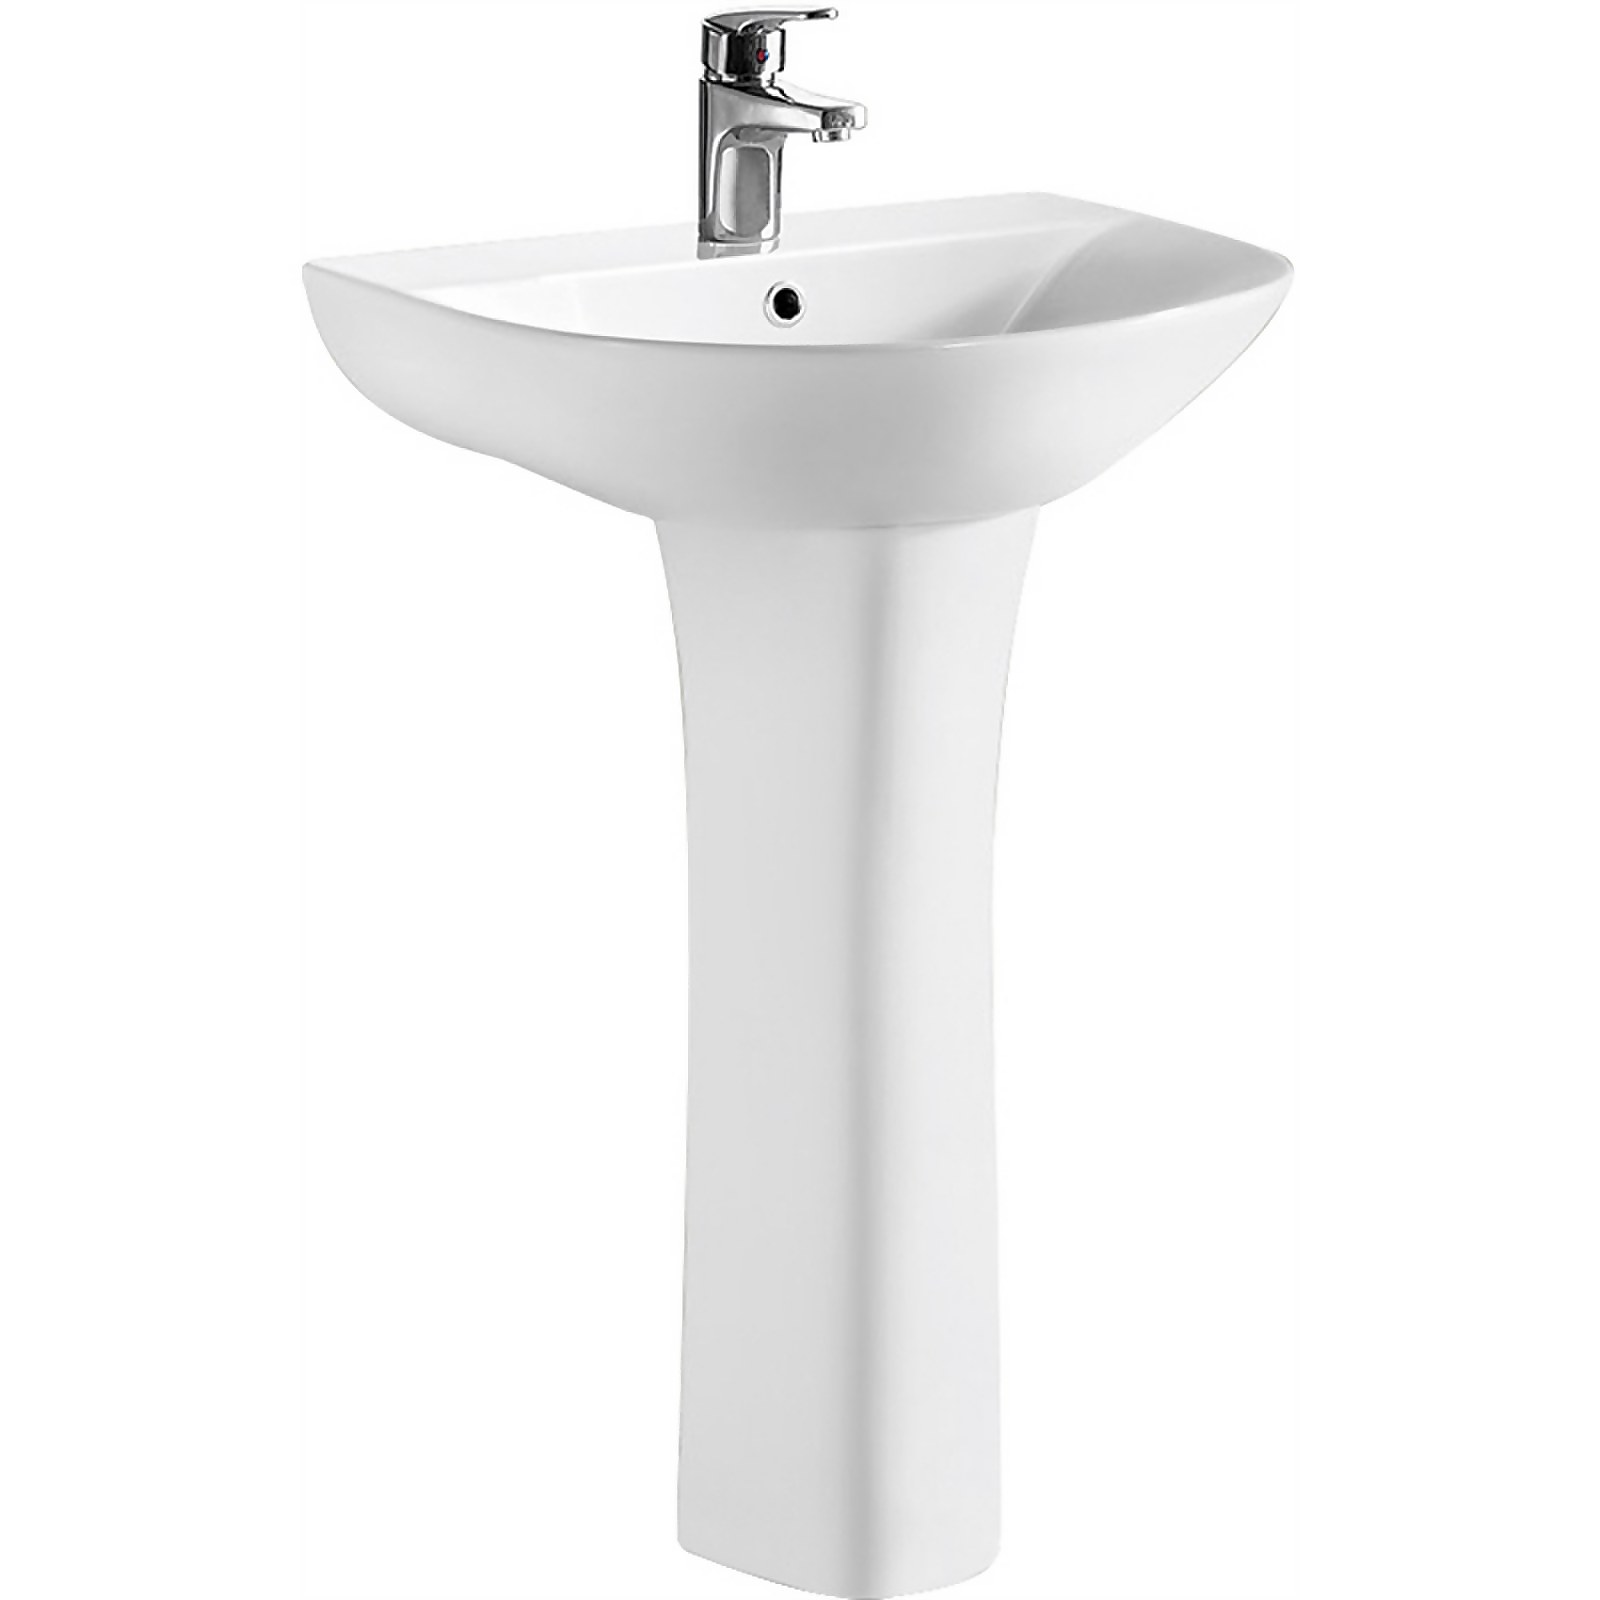 Photo of Balterley Quinn 1 Tap Hole Basin And Full Pedestal - 560mm